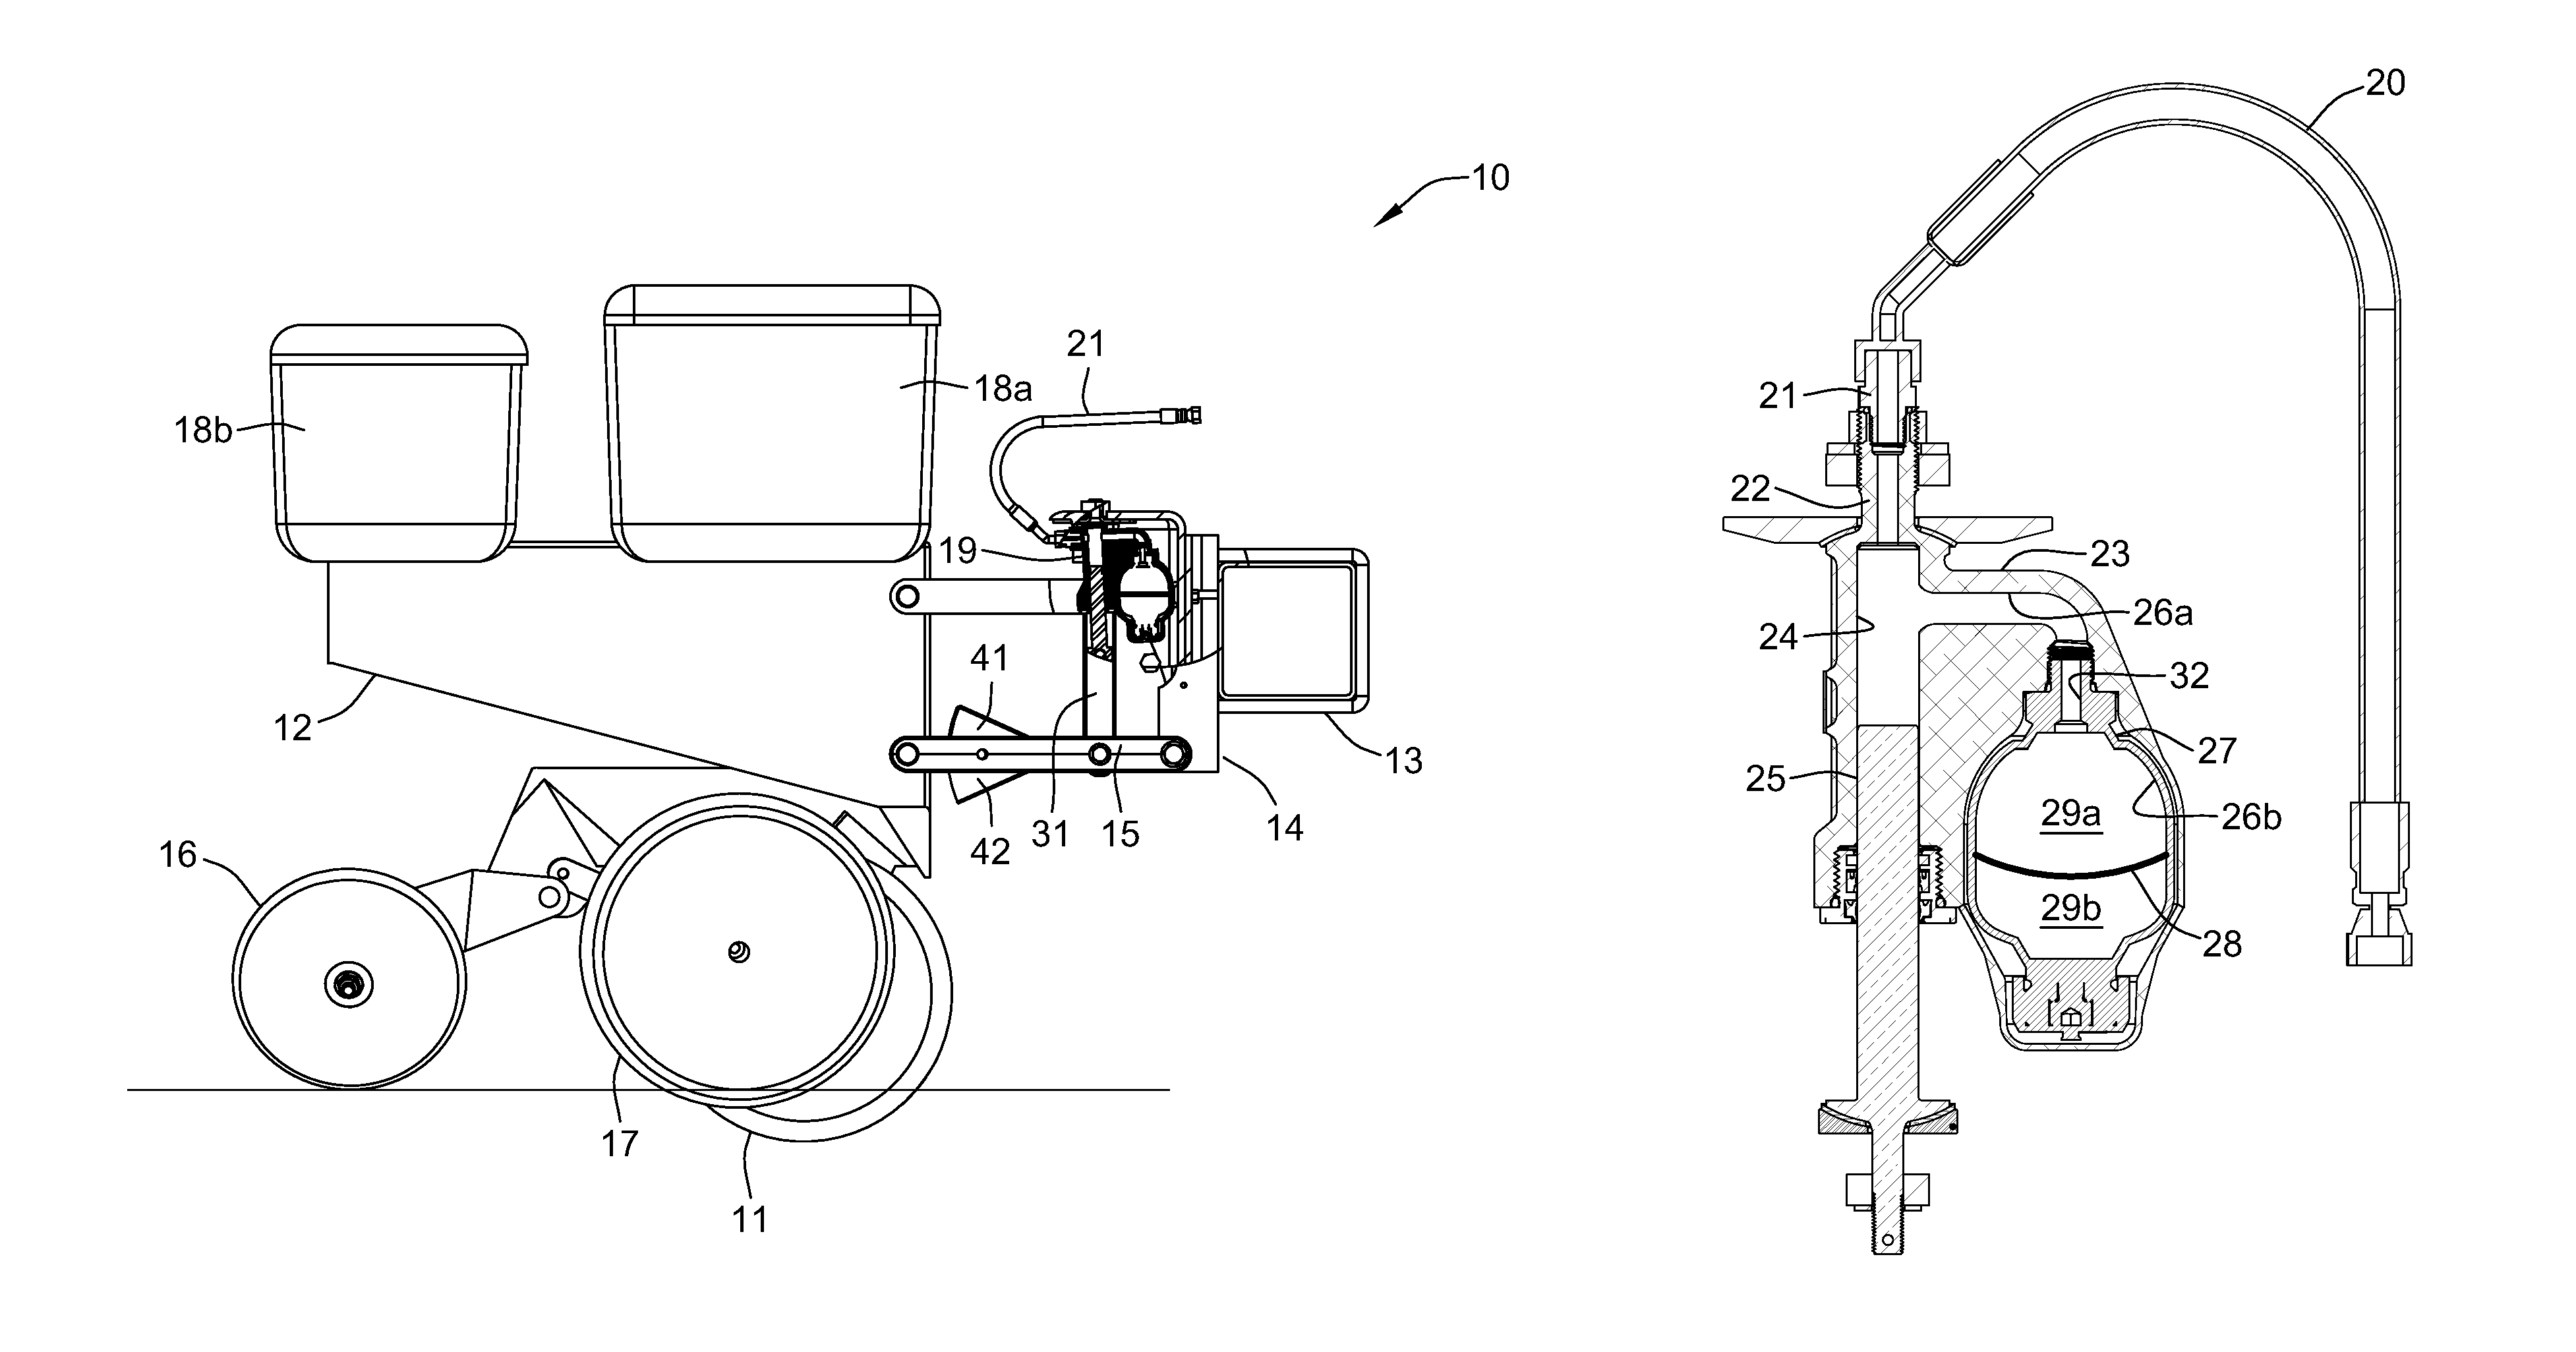 Hydraulic down pressure control system for closing wheels of an agricultural implement